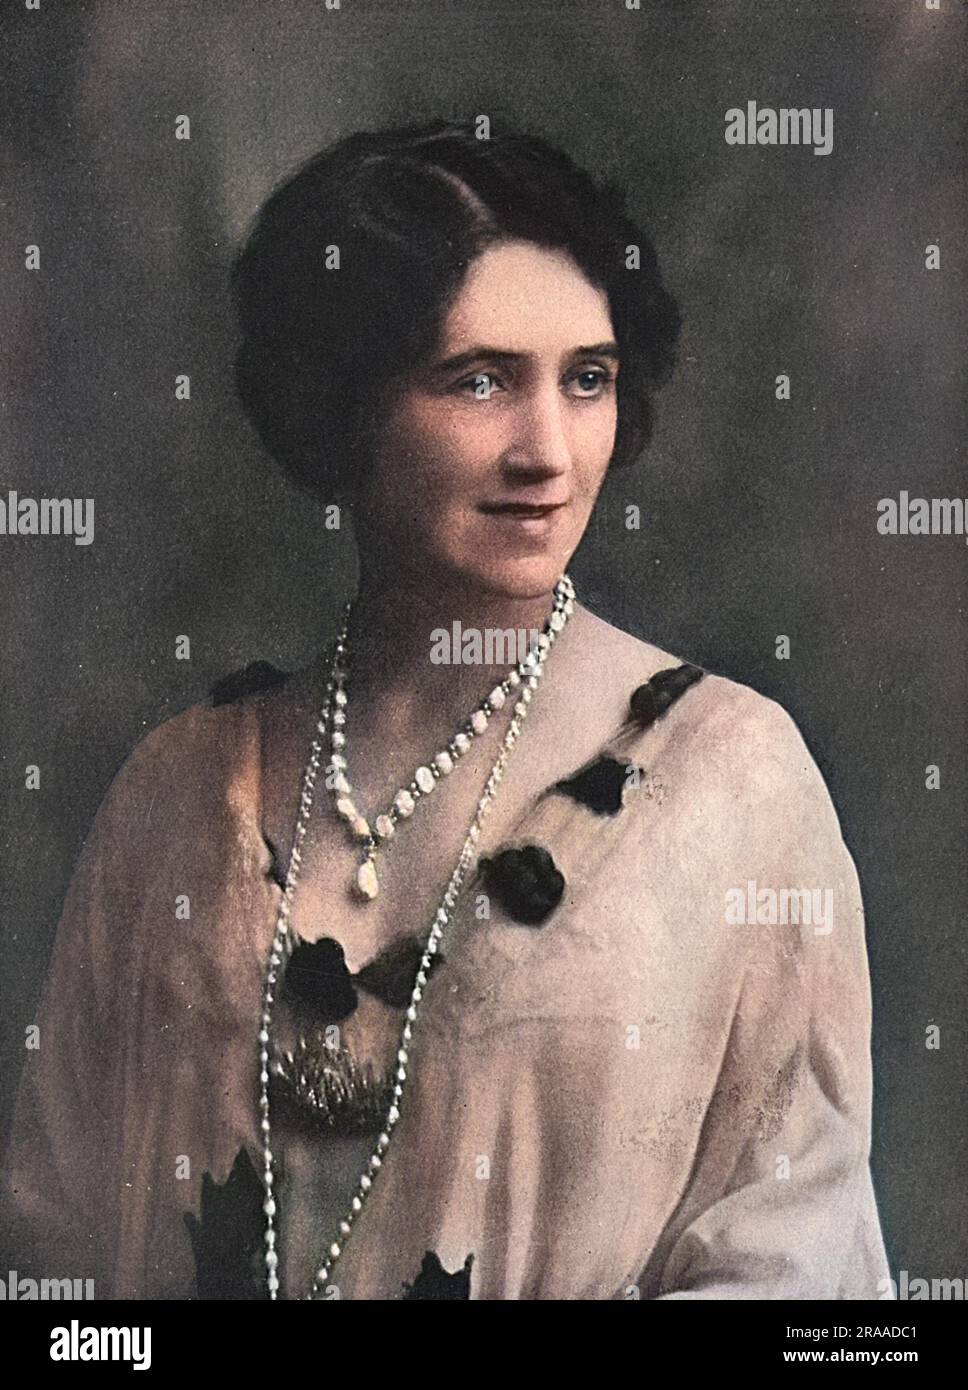 Pamela Bulwer-Lytton (née Chichele-Plowden), Countess of Lytton, who ran her own hospital for wounded soldiers during the First World War and organised a number of entertainments and enterprises in connection with raising money for war funds.     Date: 1917 Stock Photo